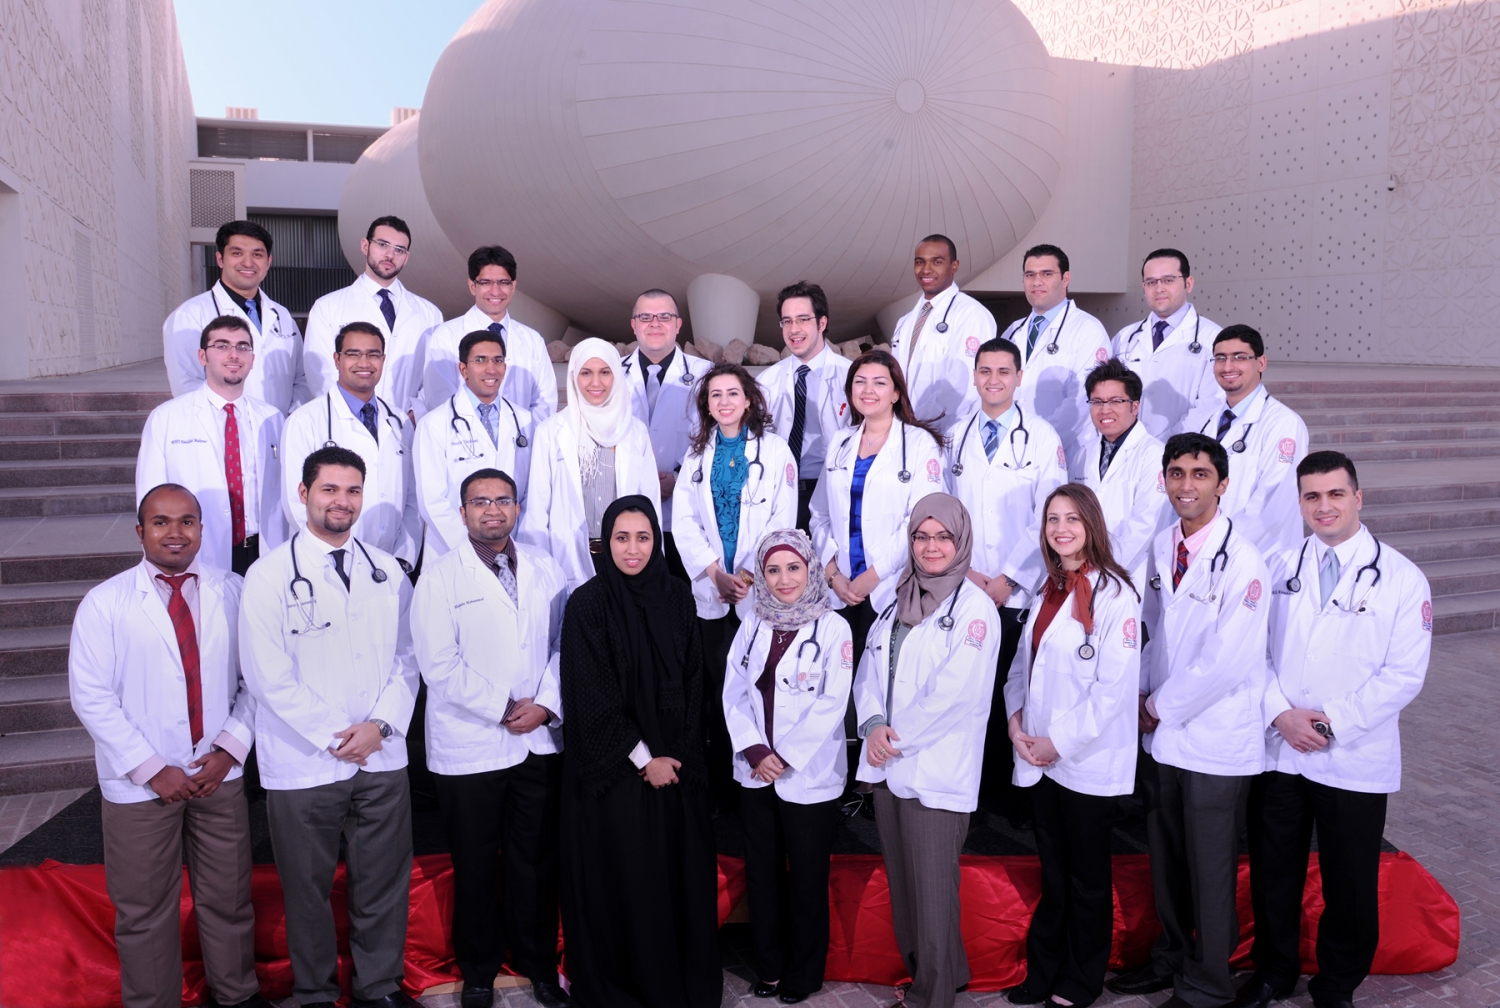 Weill Cornell Medical College in Qatar Class of 2012